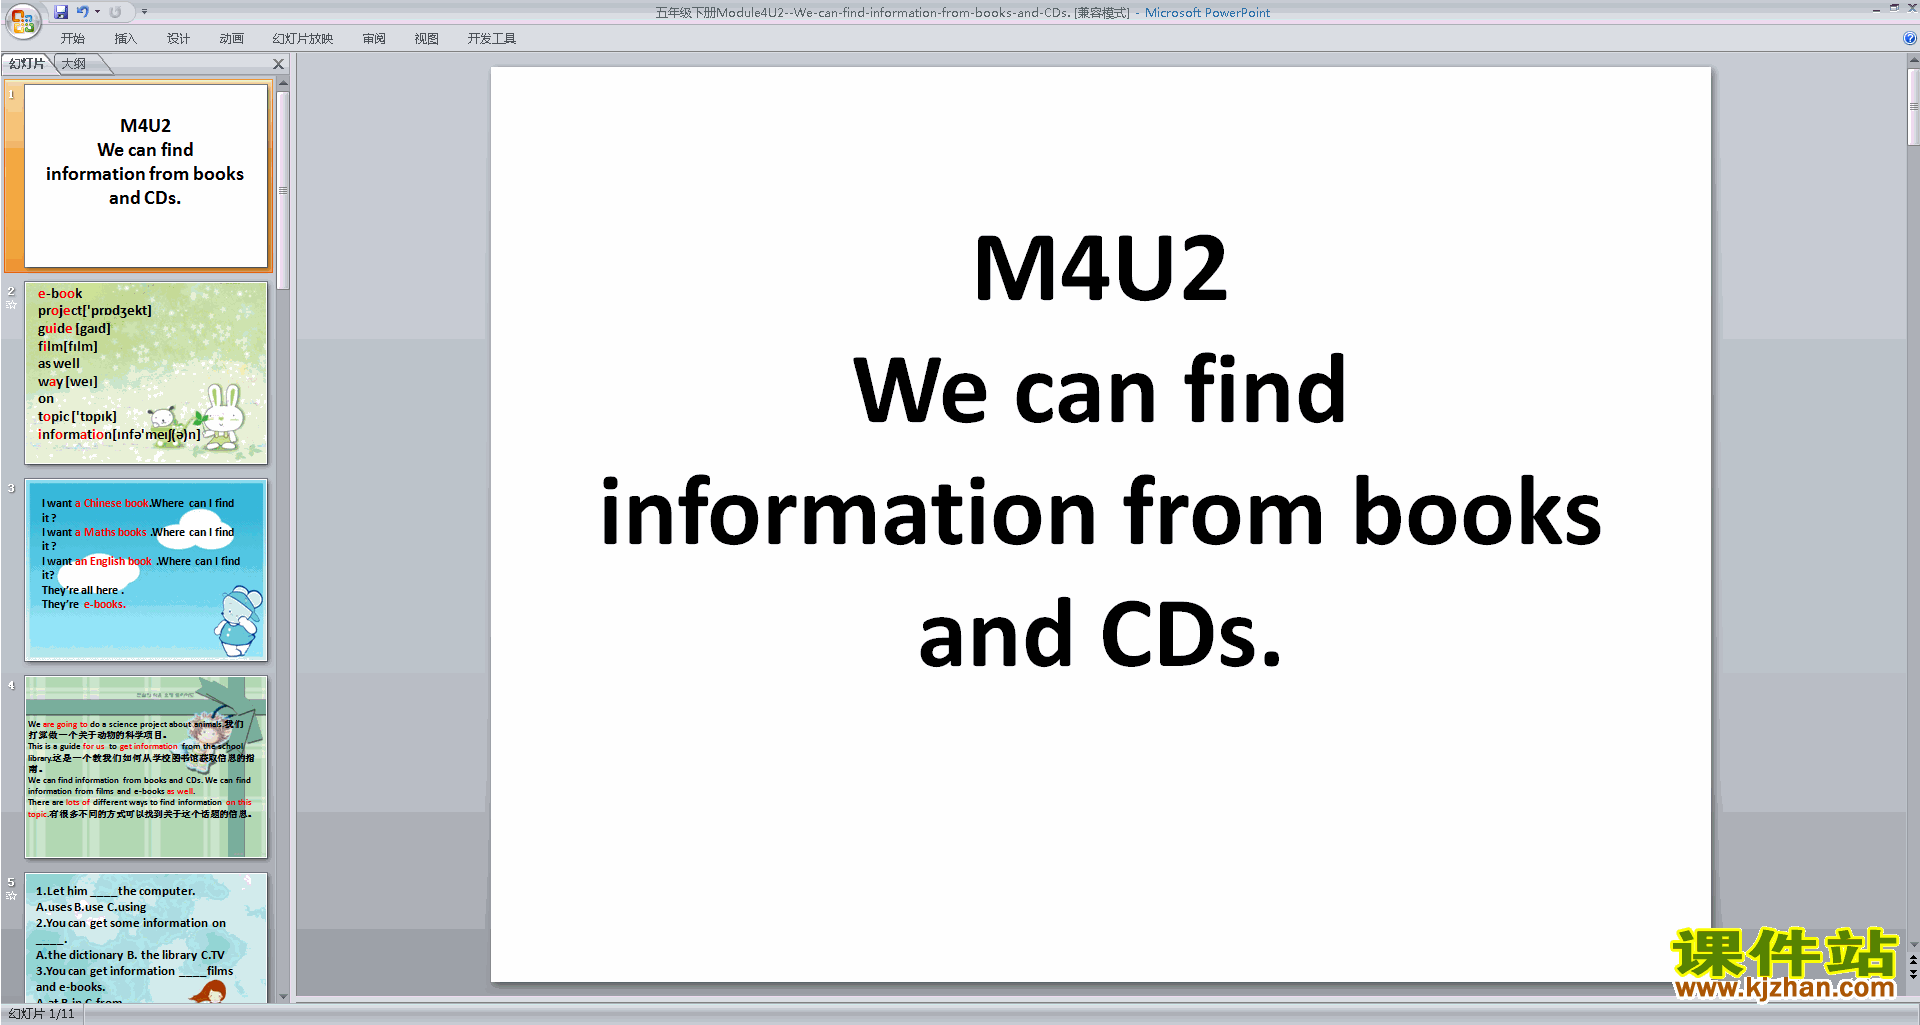 аUnit2 We can find information from books and CDs